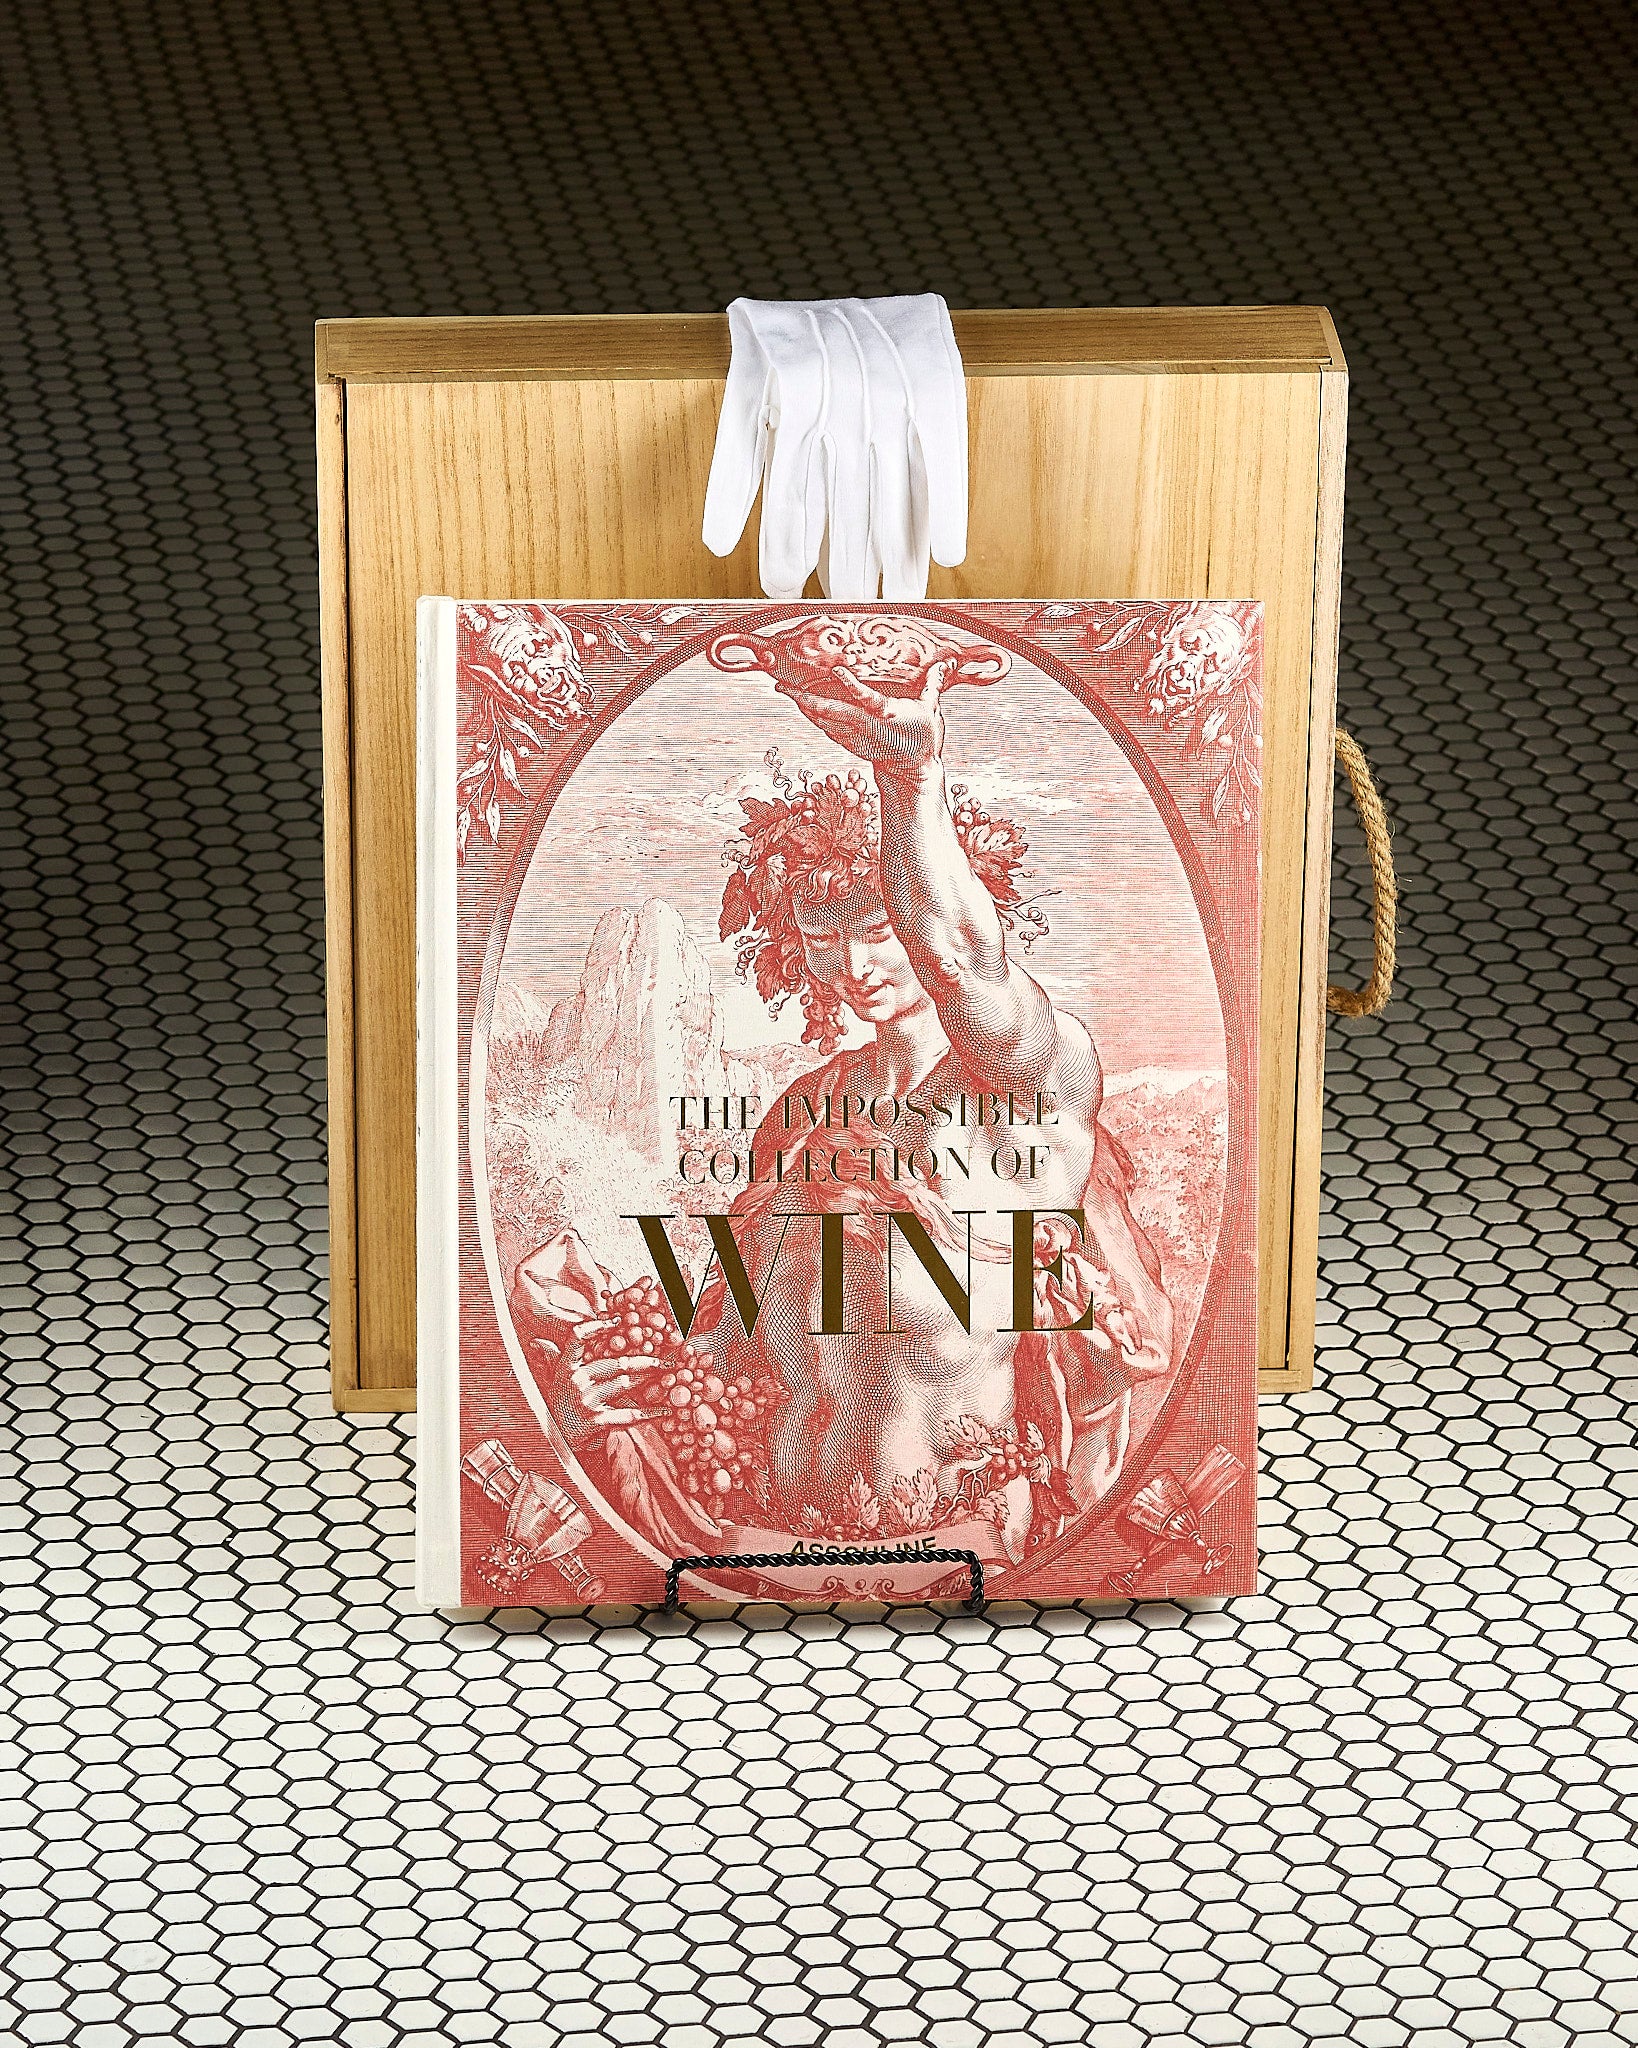 The Impossible Collection of Wine book by Enrico Bernardo